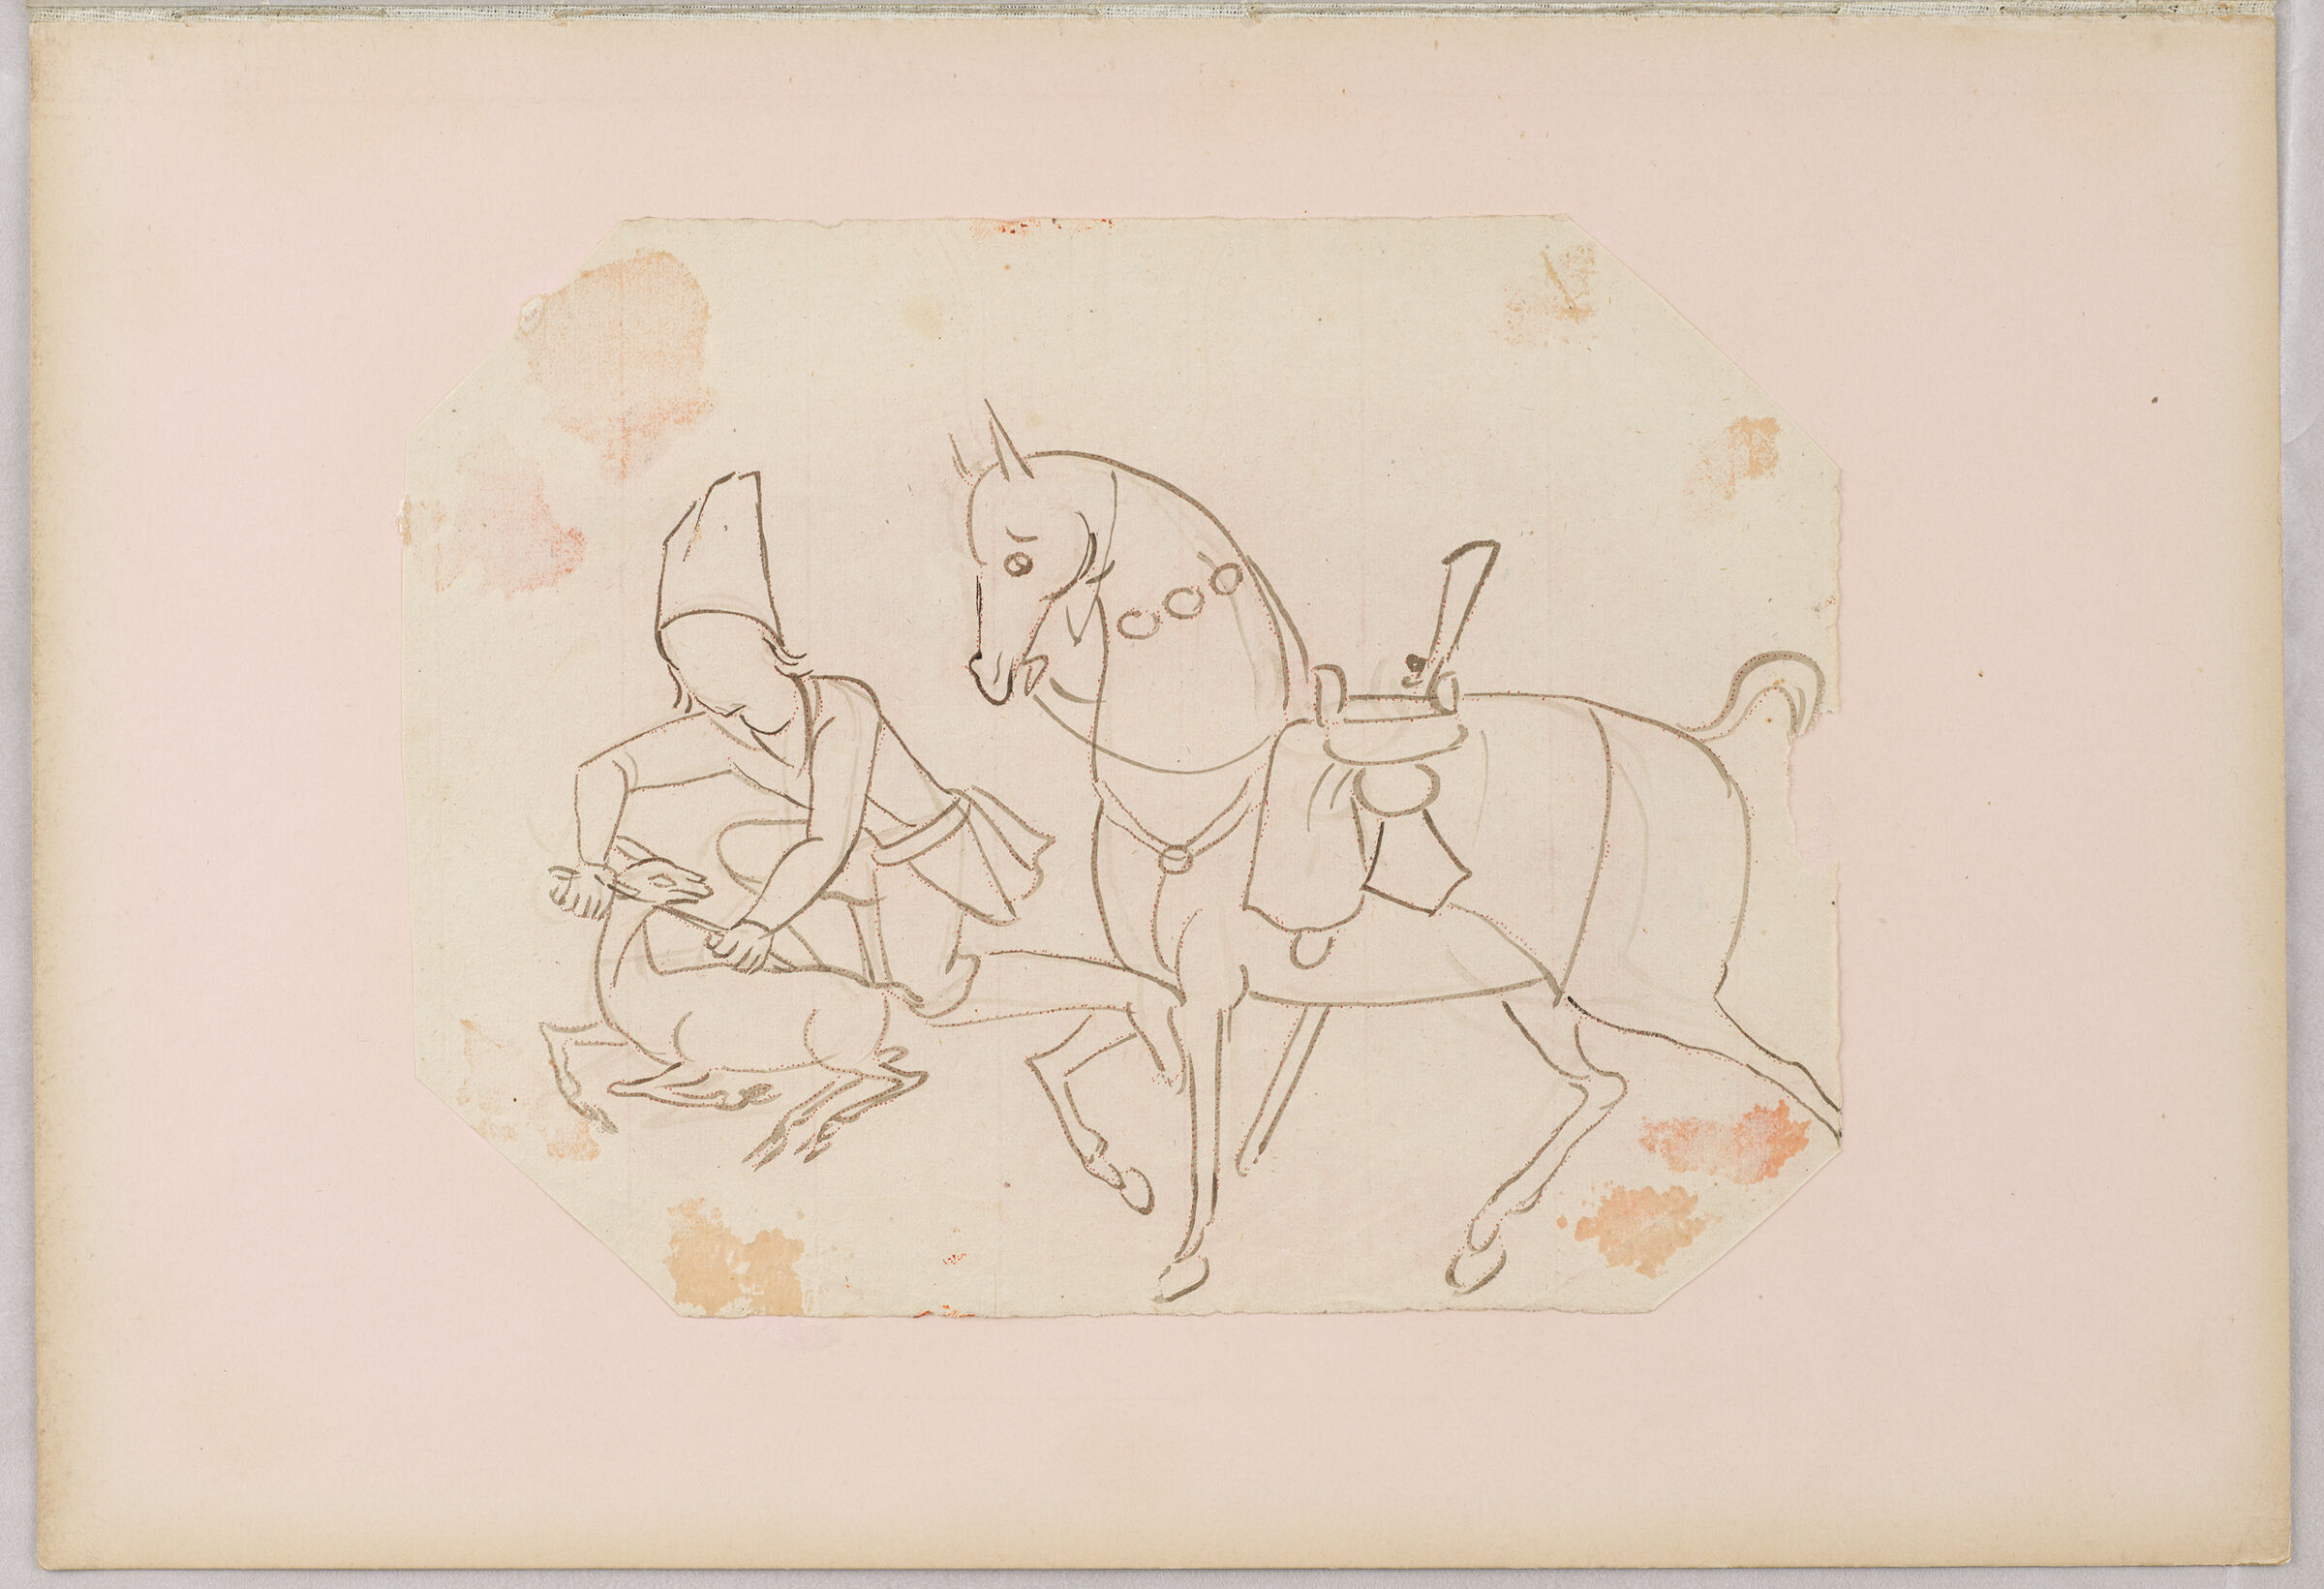 Folio 12 From An Album Of Drawings And Paintings: Hunter Dismounted From Horse, Killing A Deer (Recto); Blank Page (Verso)